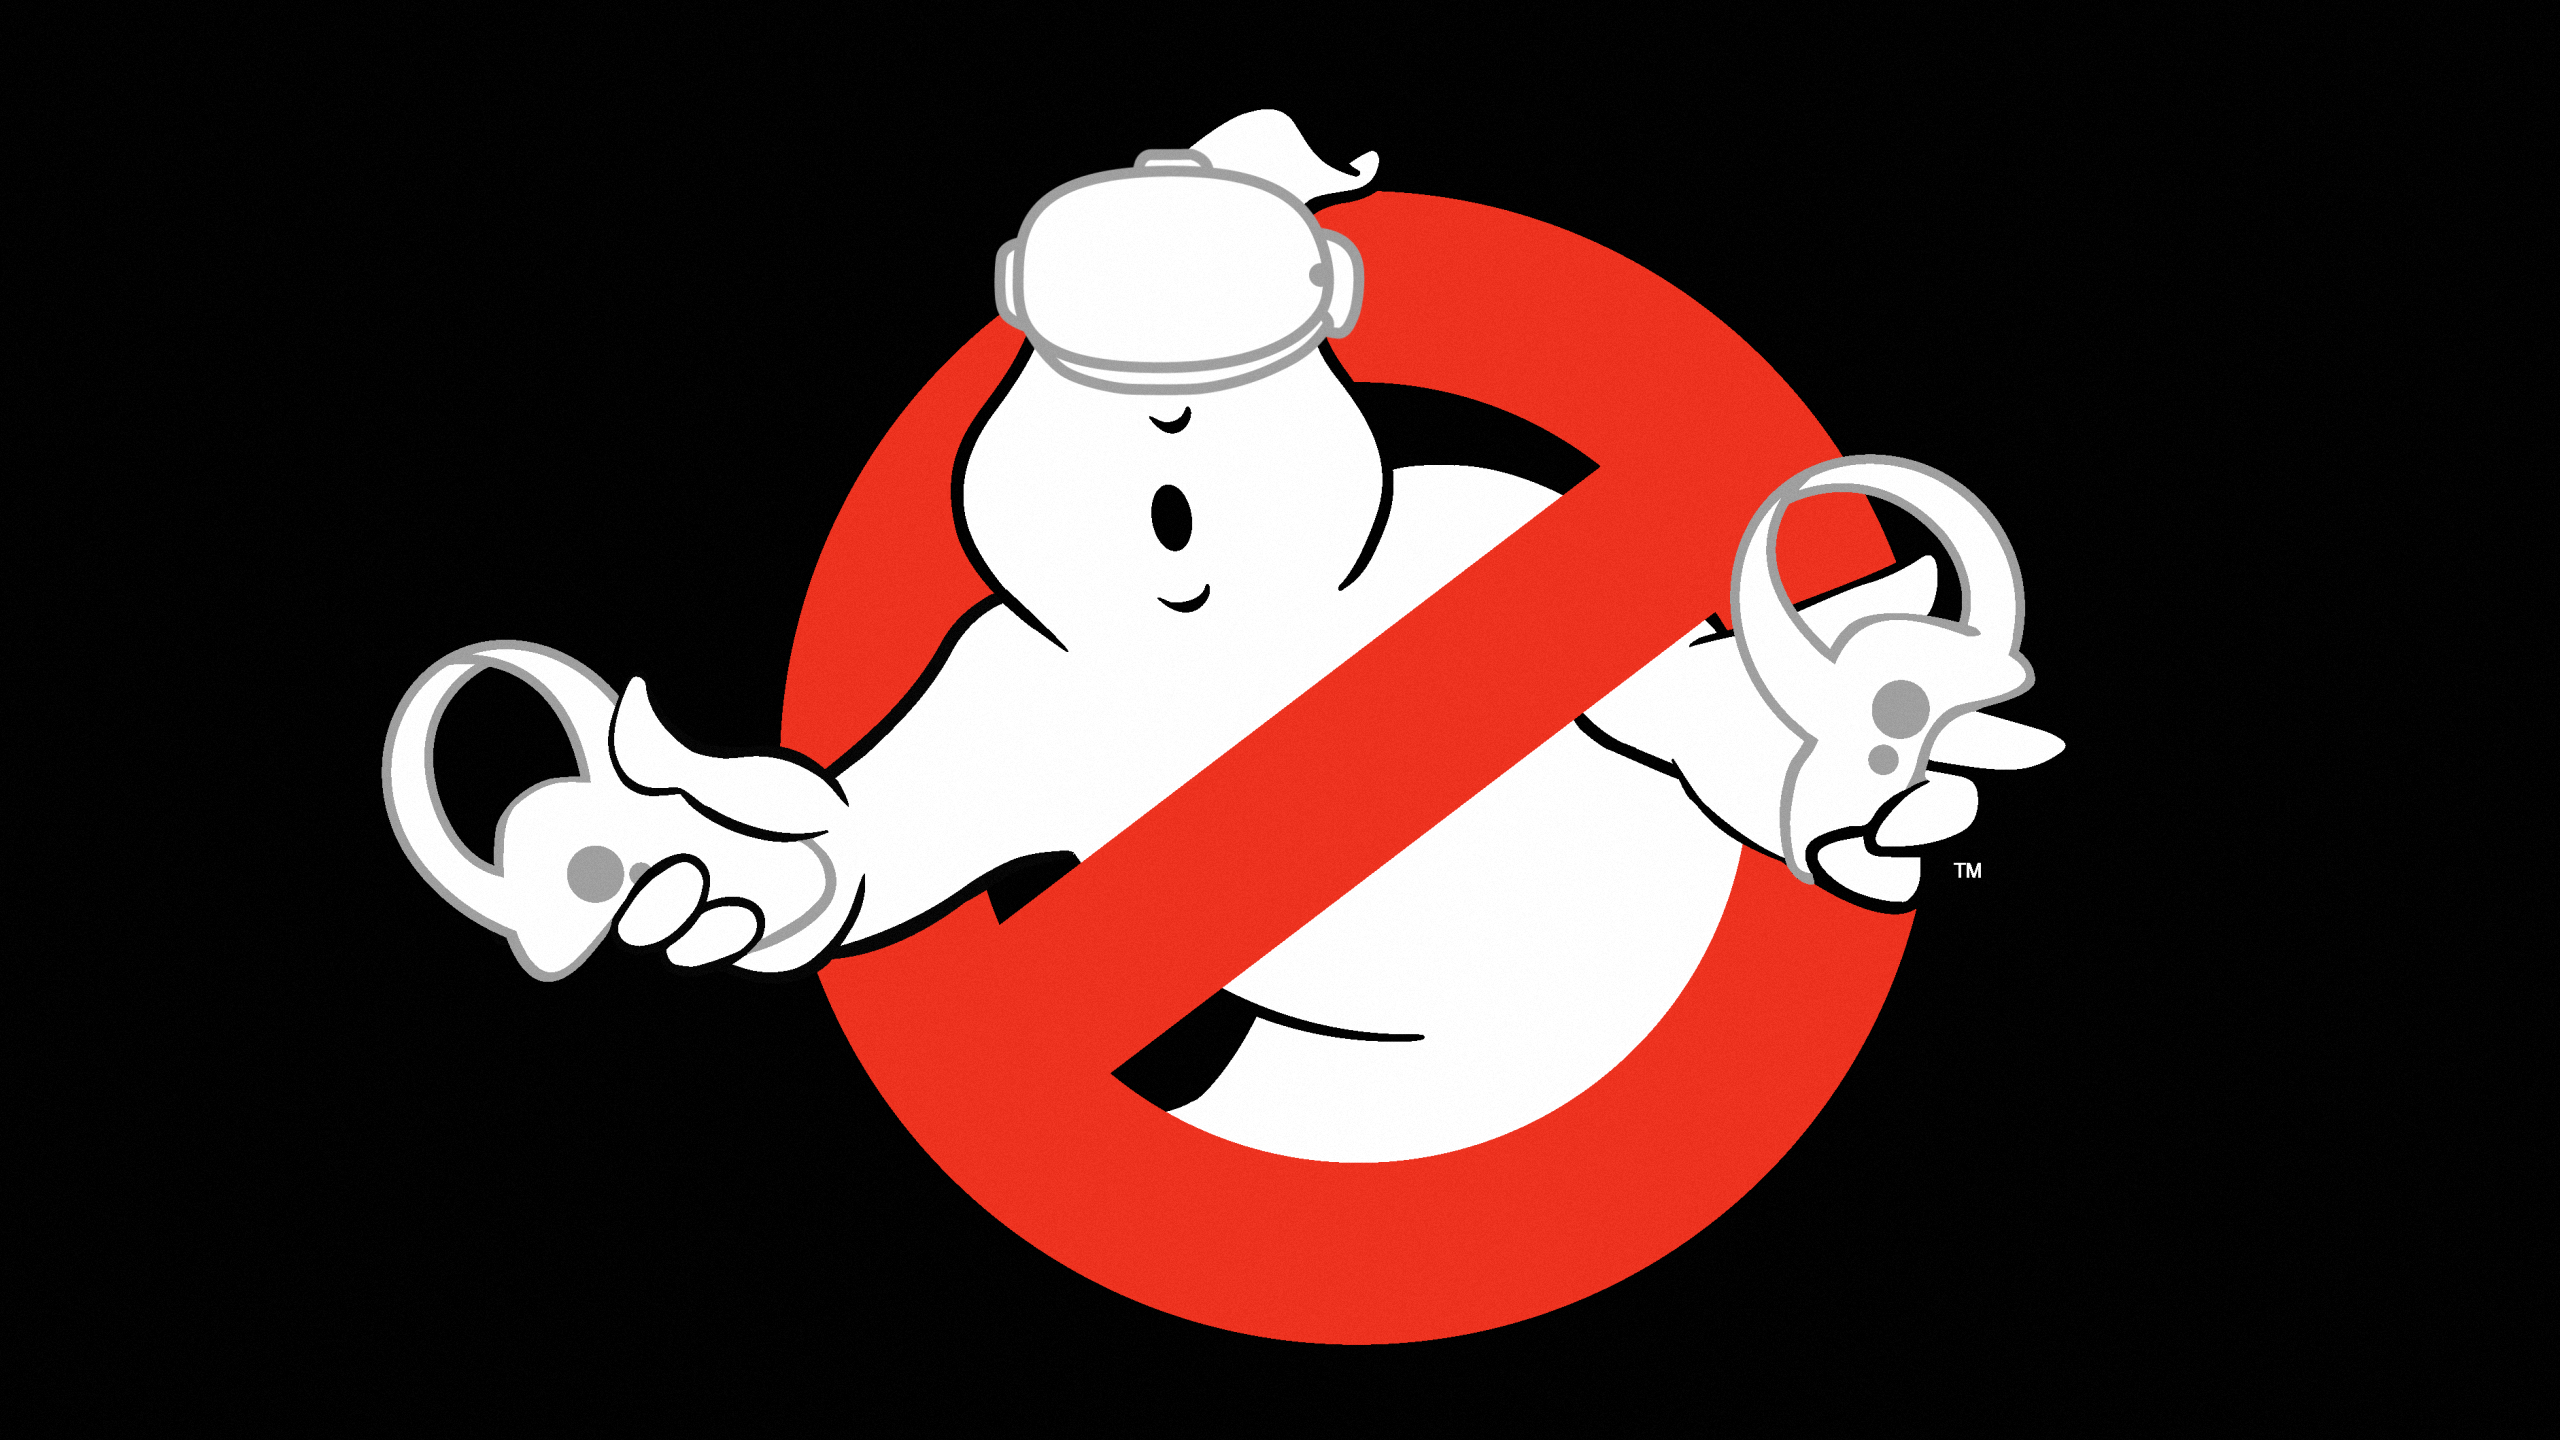 The new Ghostbusters VR logo - the ghost is wearing a Quest 2